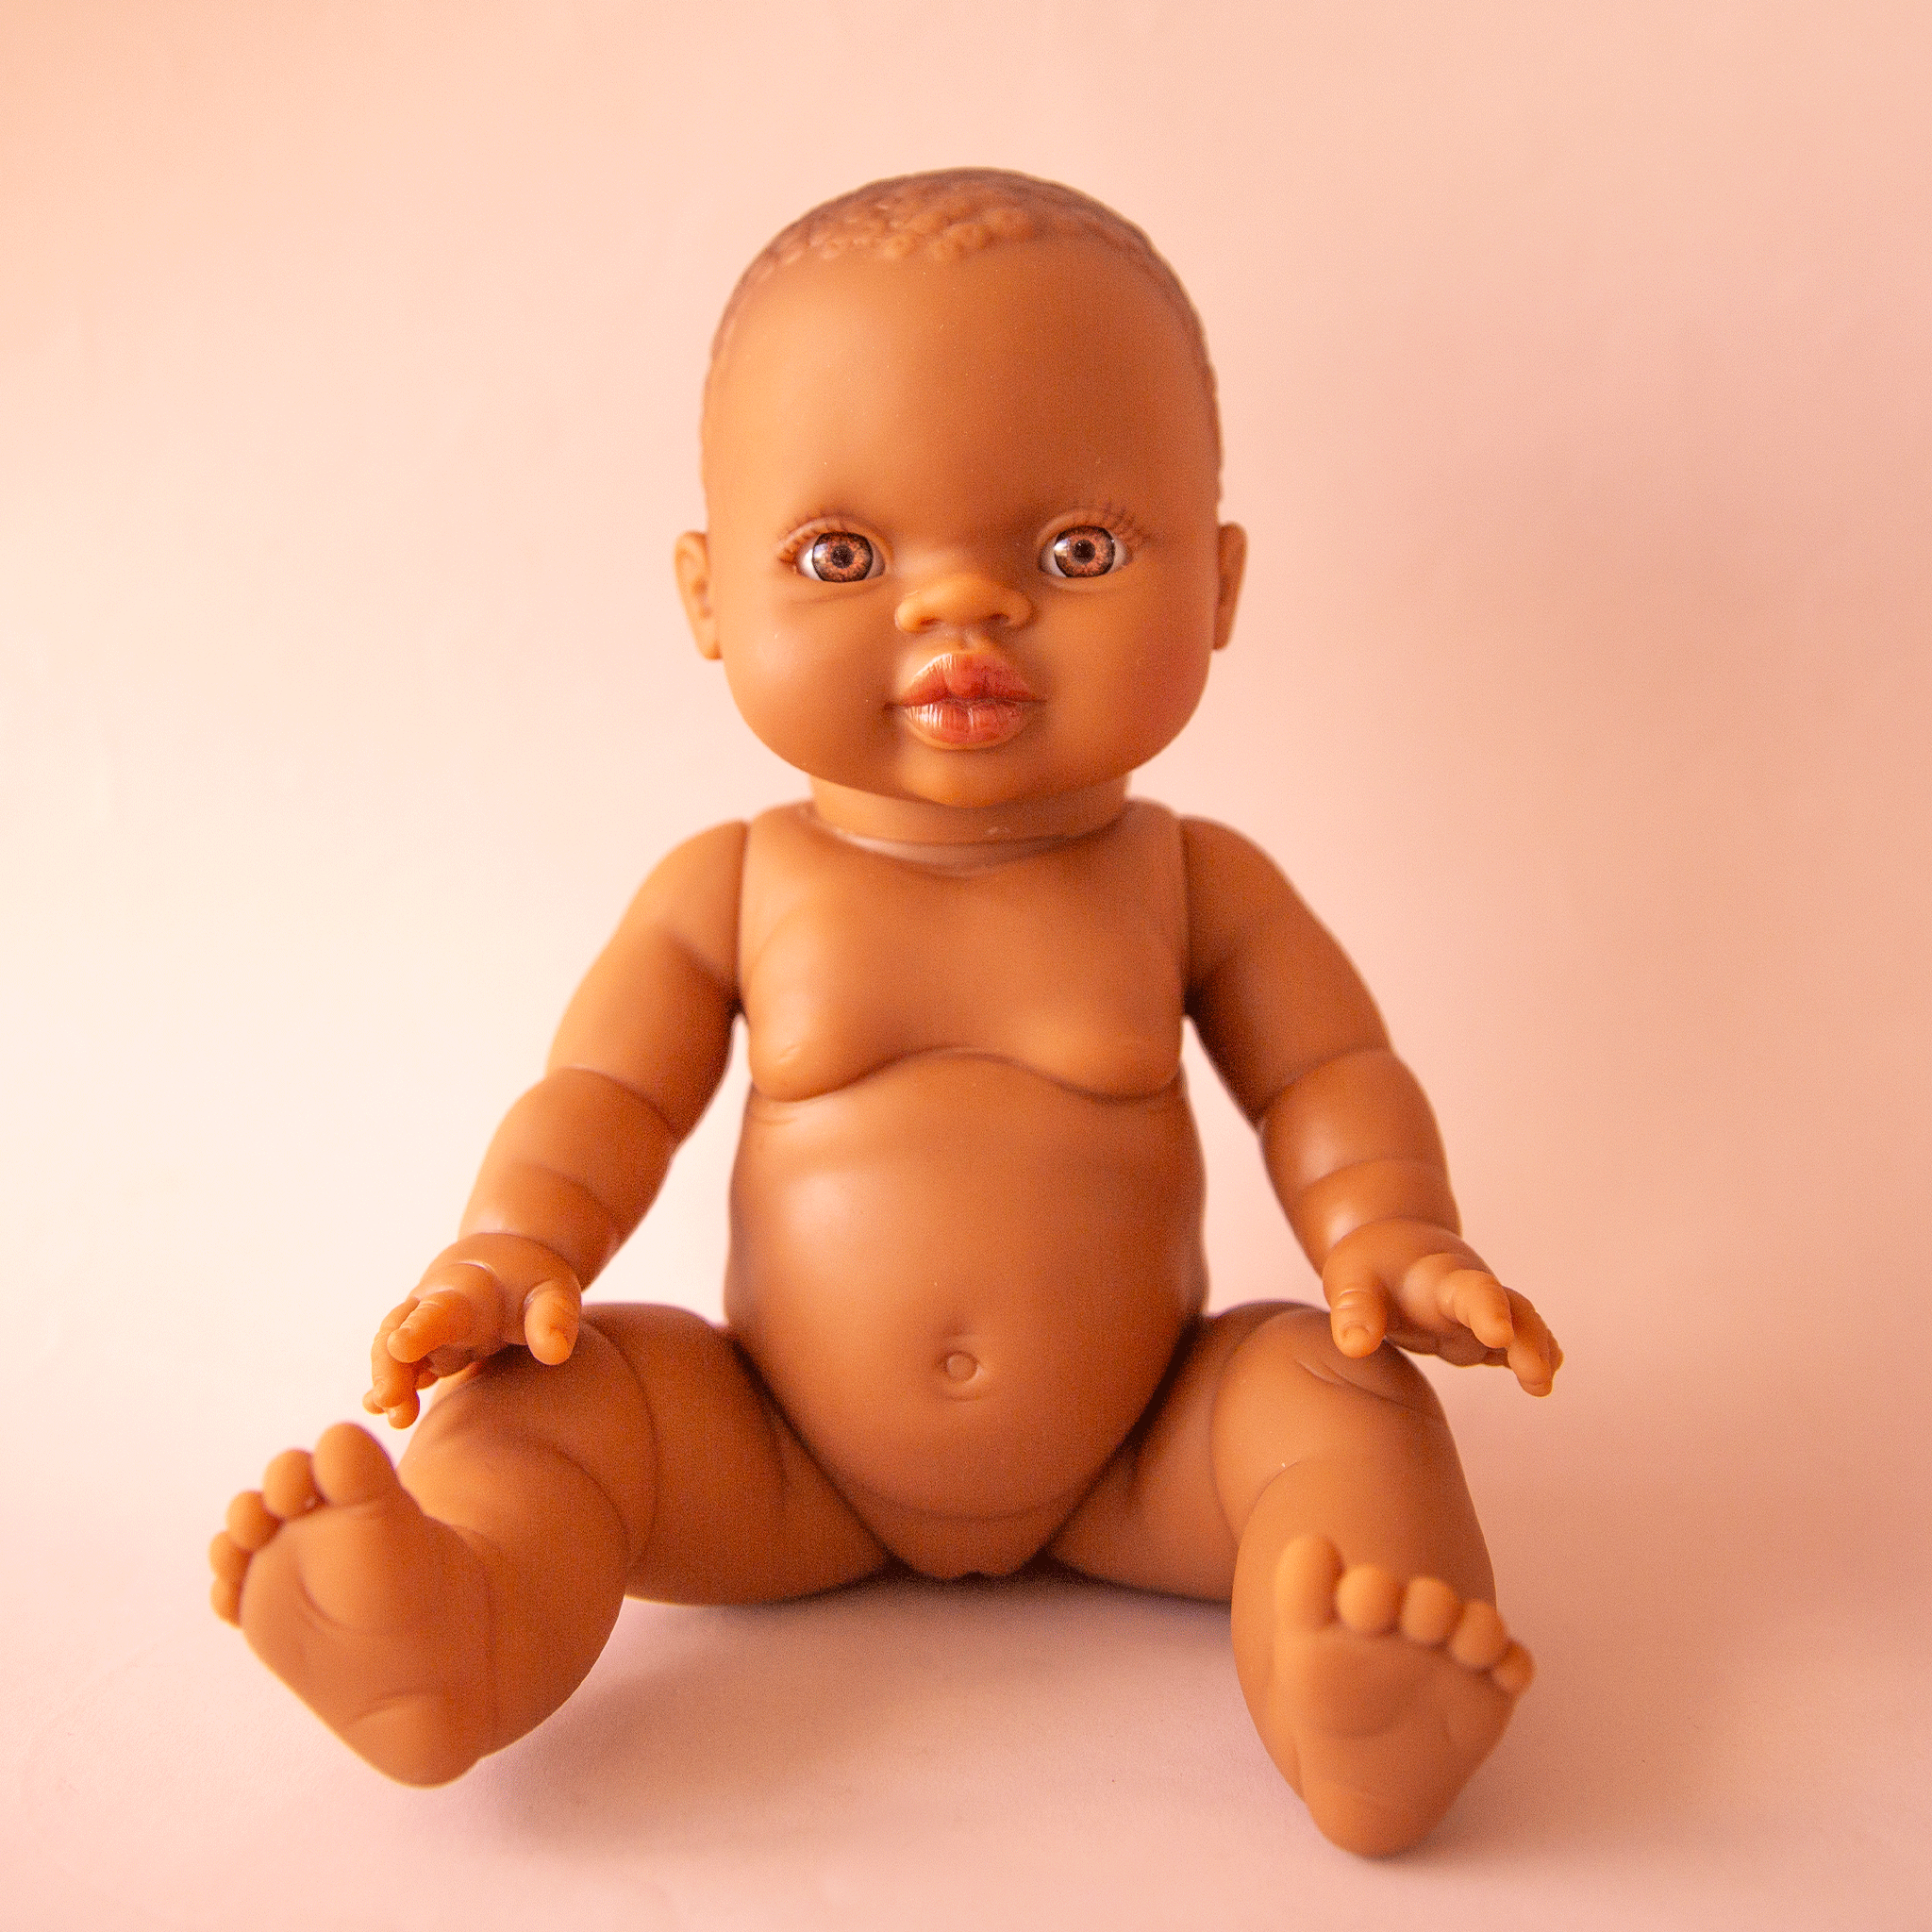 An African American baby girl doll photographed in front of a cream background.